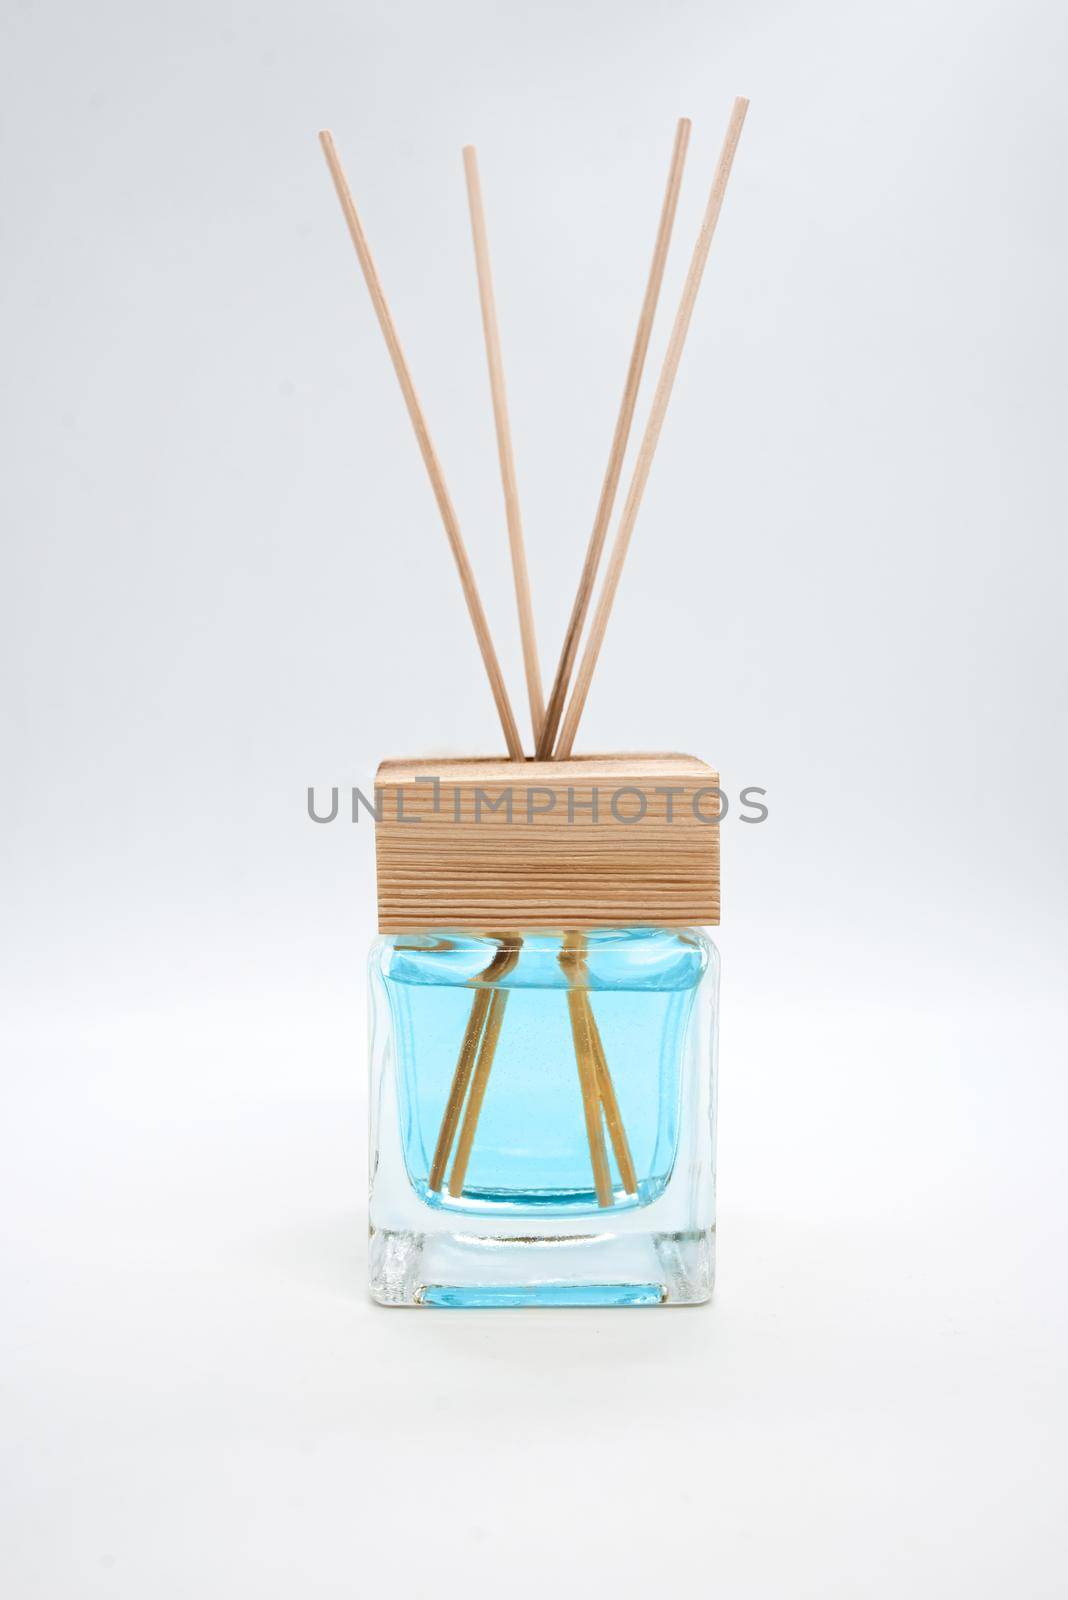 A Bottle of Lavender Fragrant Oil Diffuser with Reed Sticks, isolated on white by Nickstock